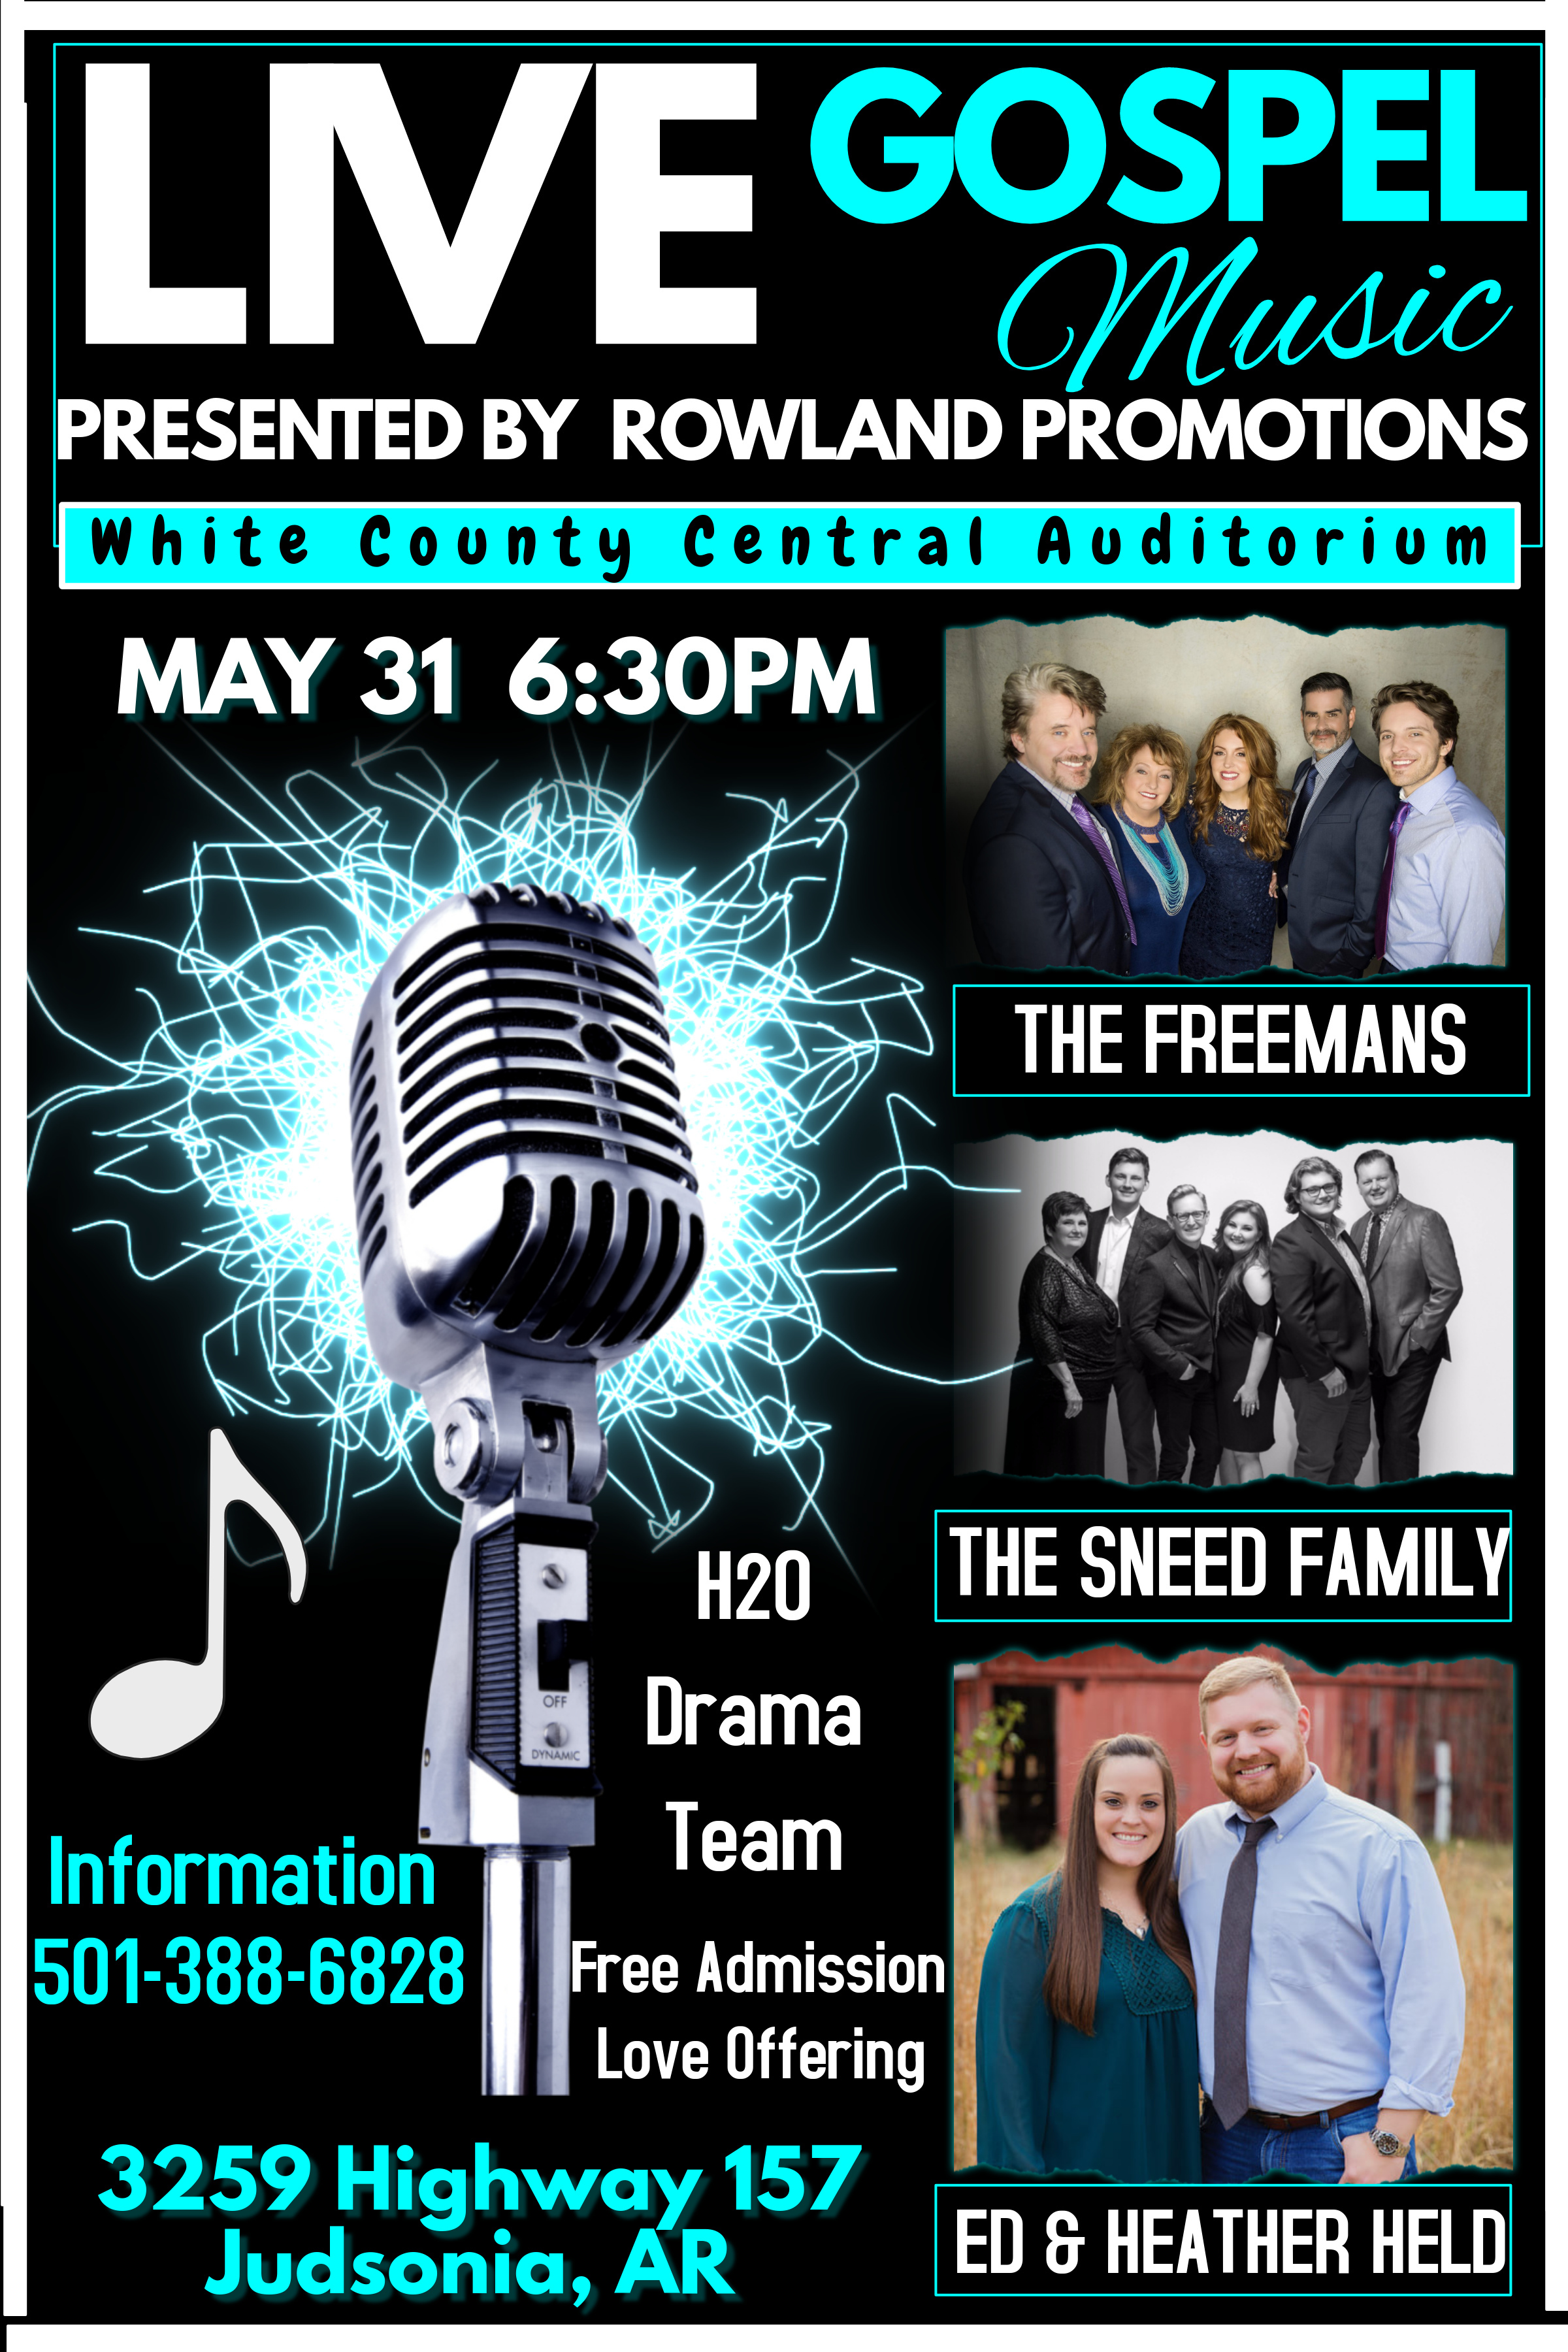 Rowland Promotions